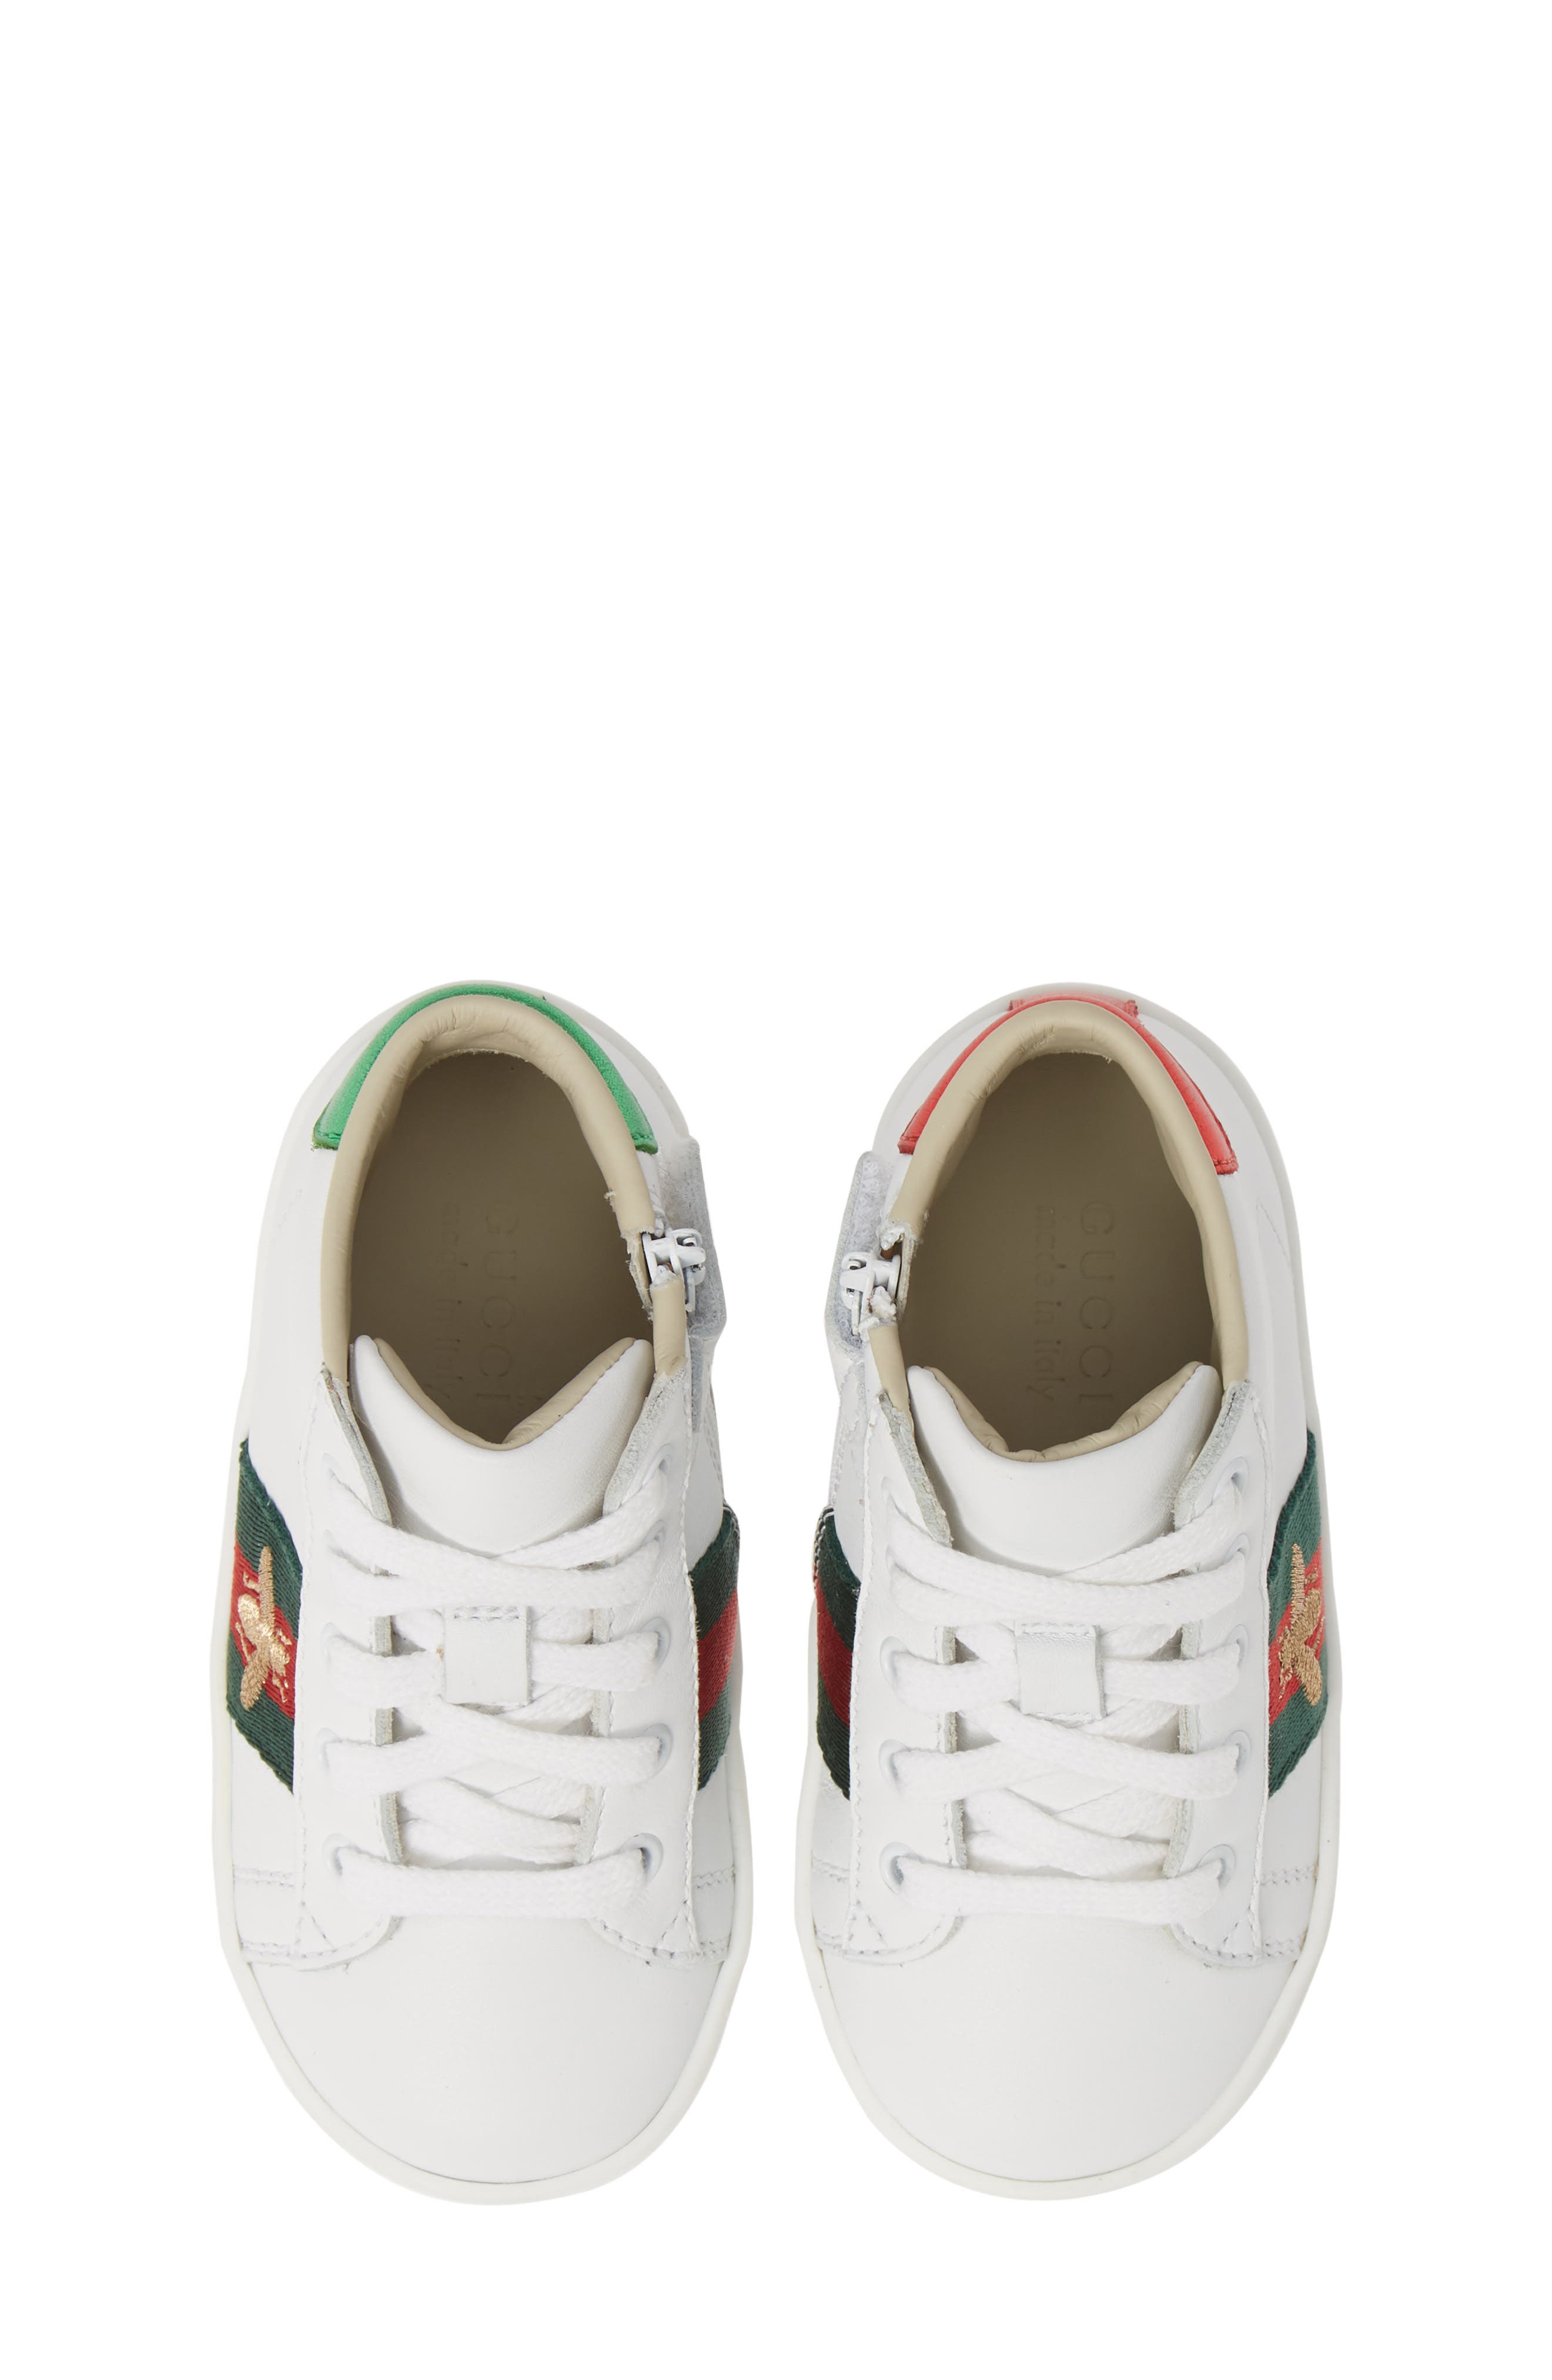 gucci ace baby